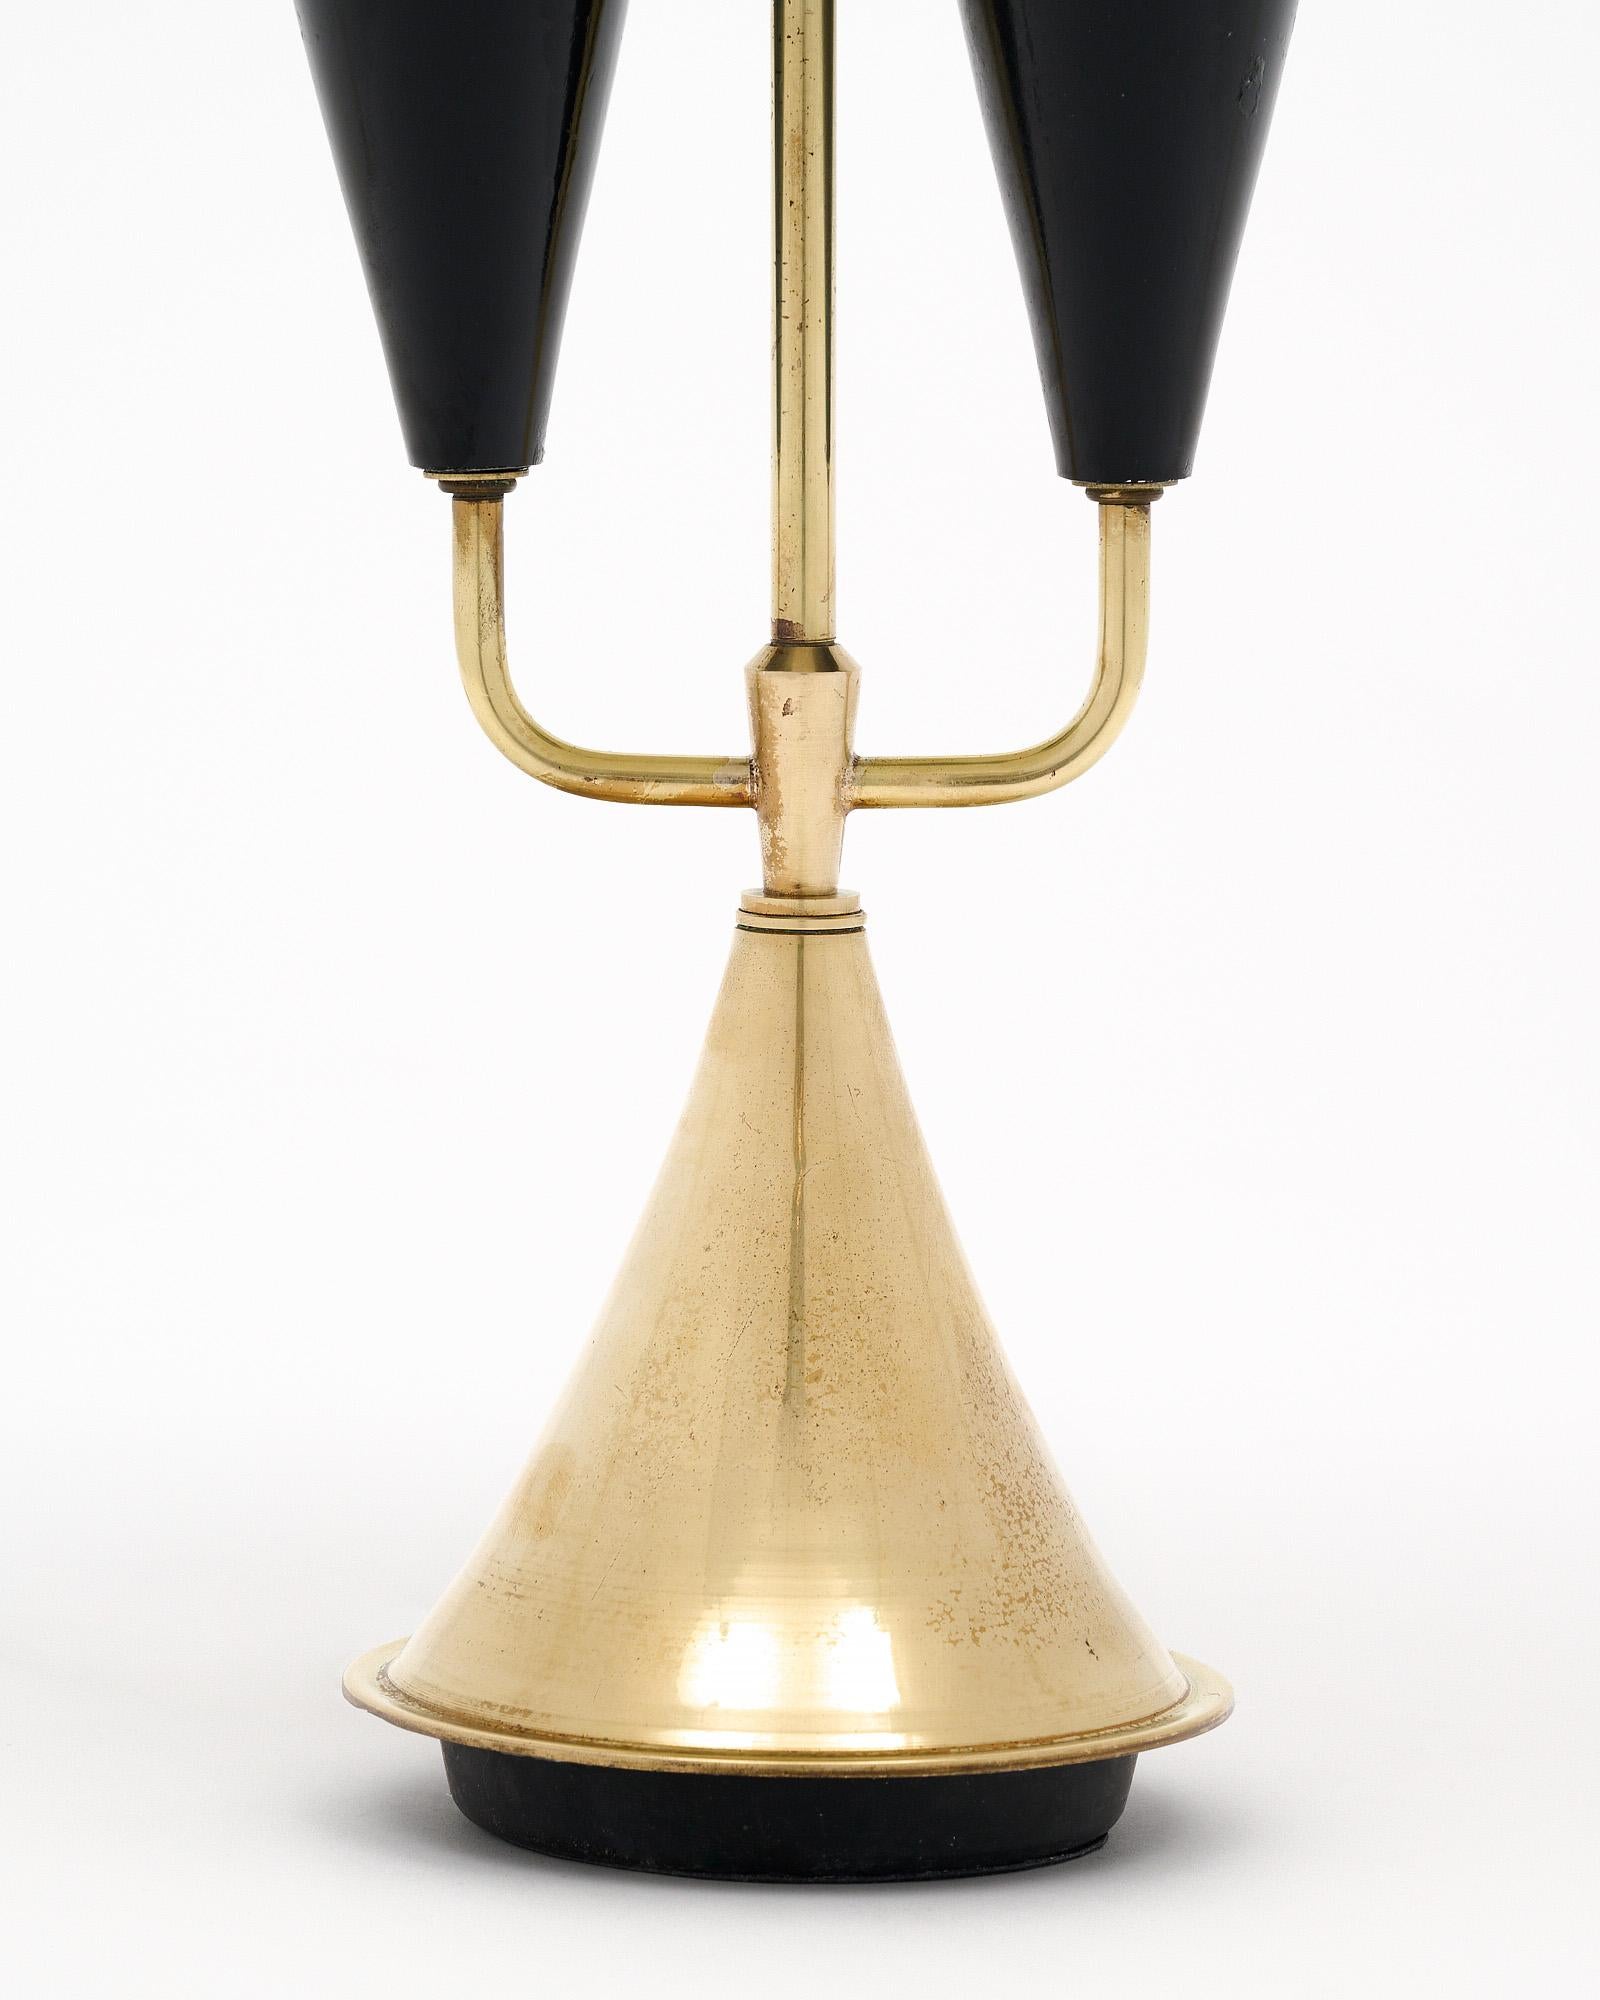 Single table lamp from Italy in the mid-century style. This piece features a brass structure with lacquered metal shade in black. The shade matches the conical candelabra lights. This is an elegant and stylish piece, perfect for a side table or